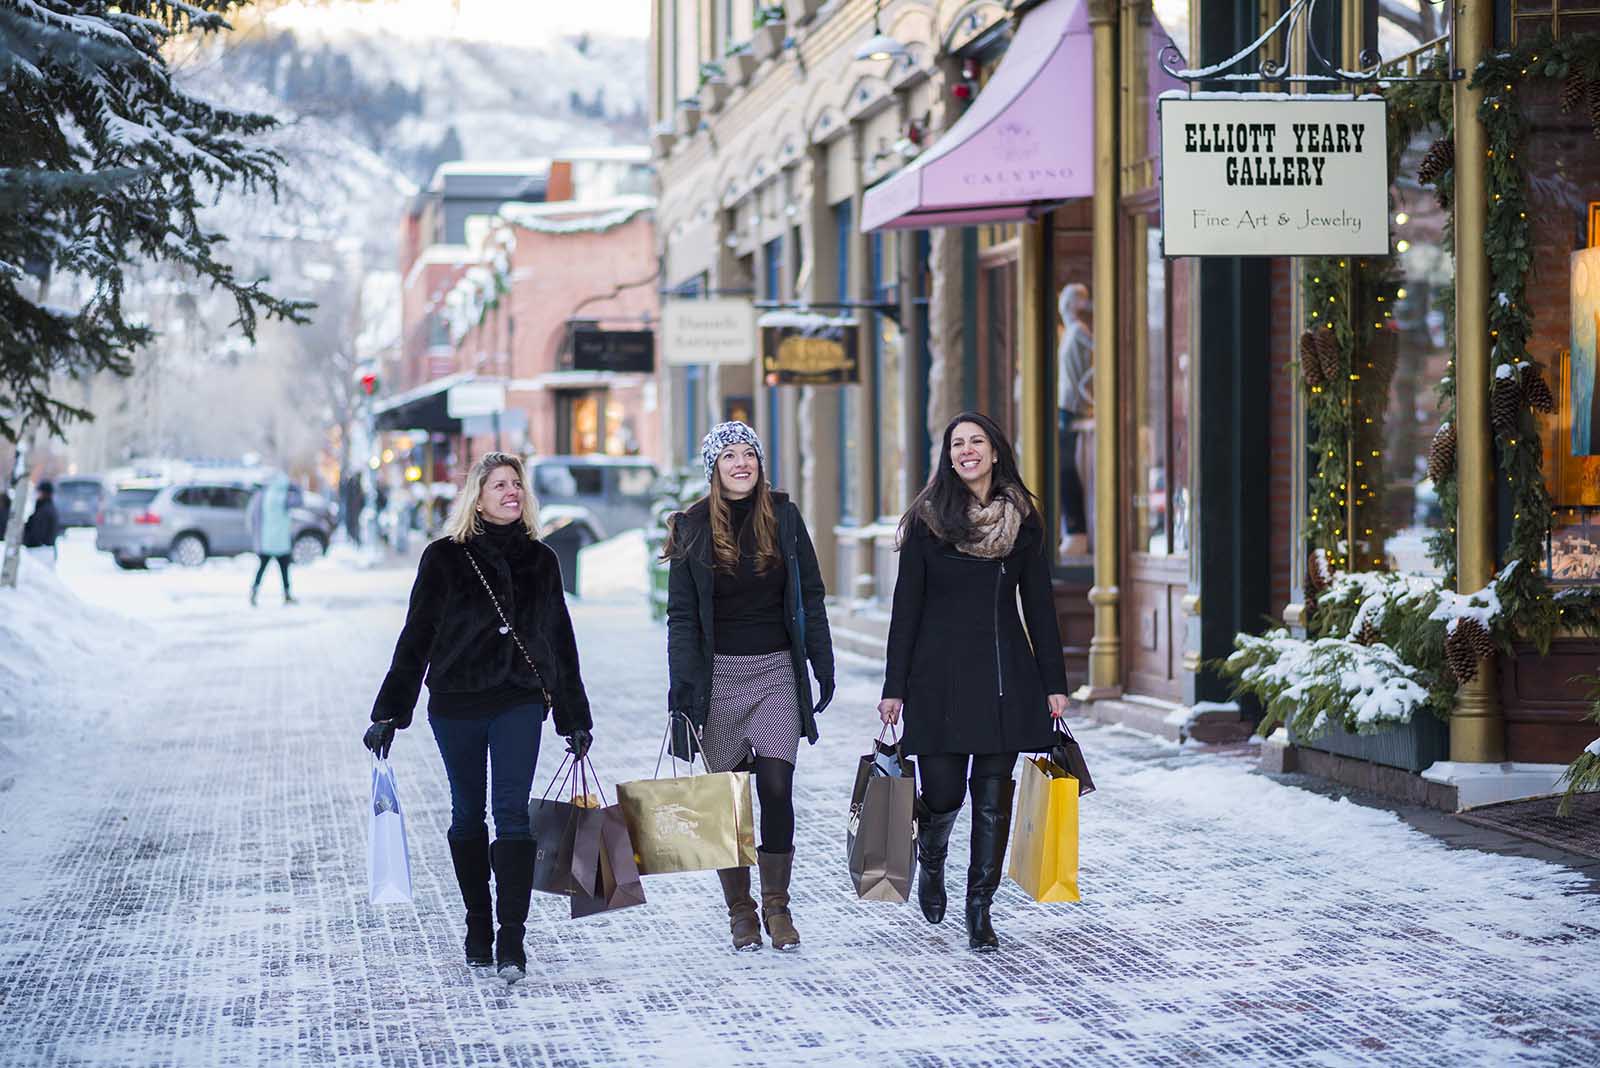 There's plenty of après ski action in Aspen too